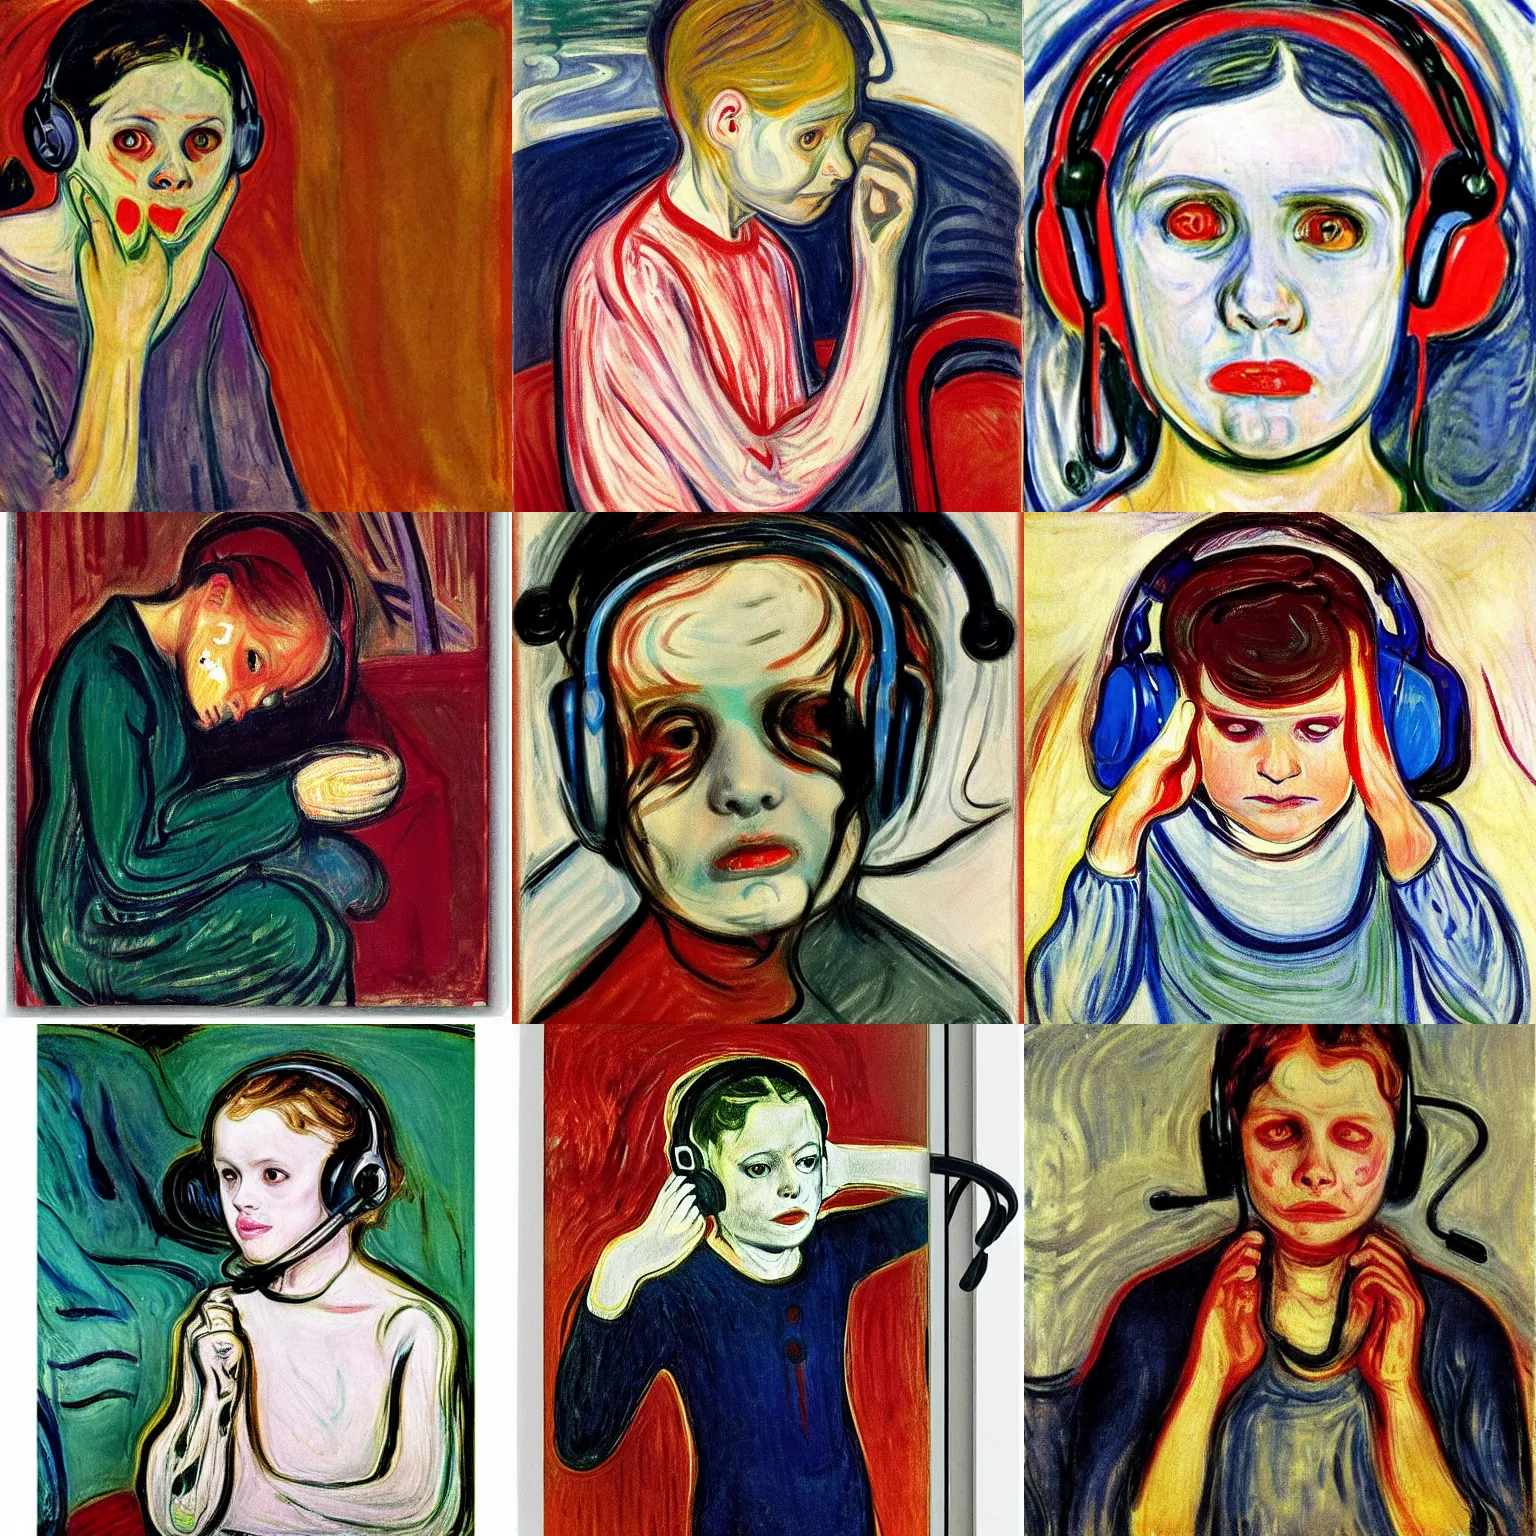 Prompt: The sick child by edvard munch wearing skullcandy headphones